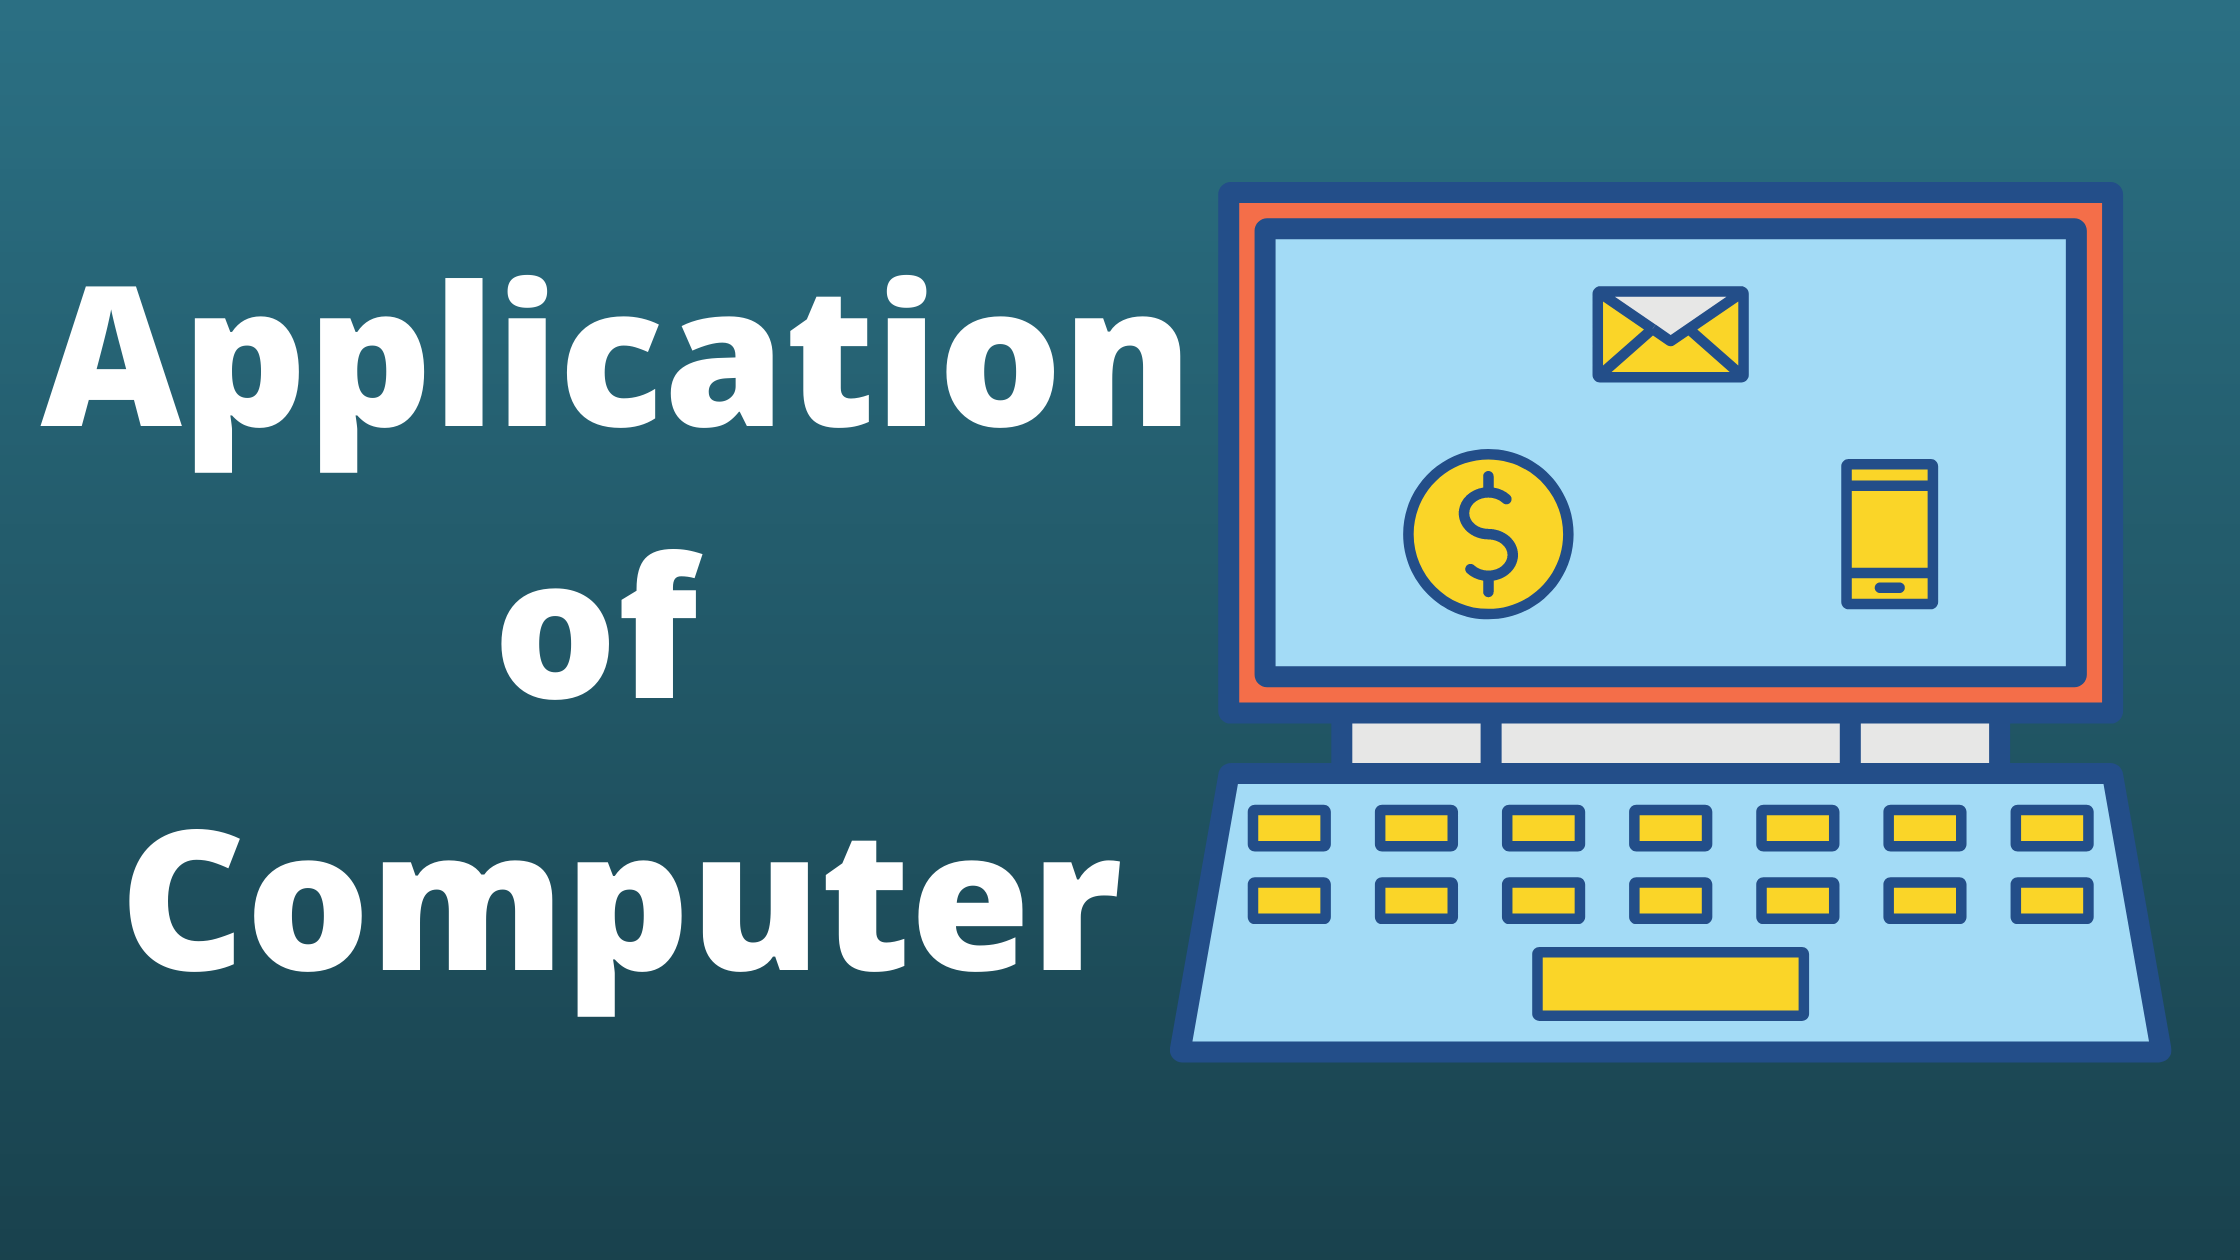 Application of Computer